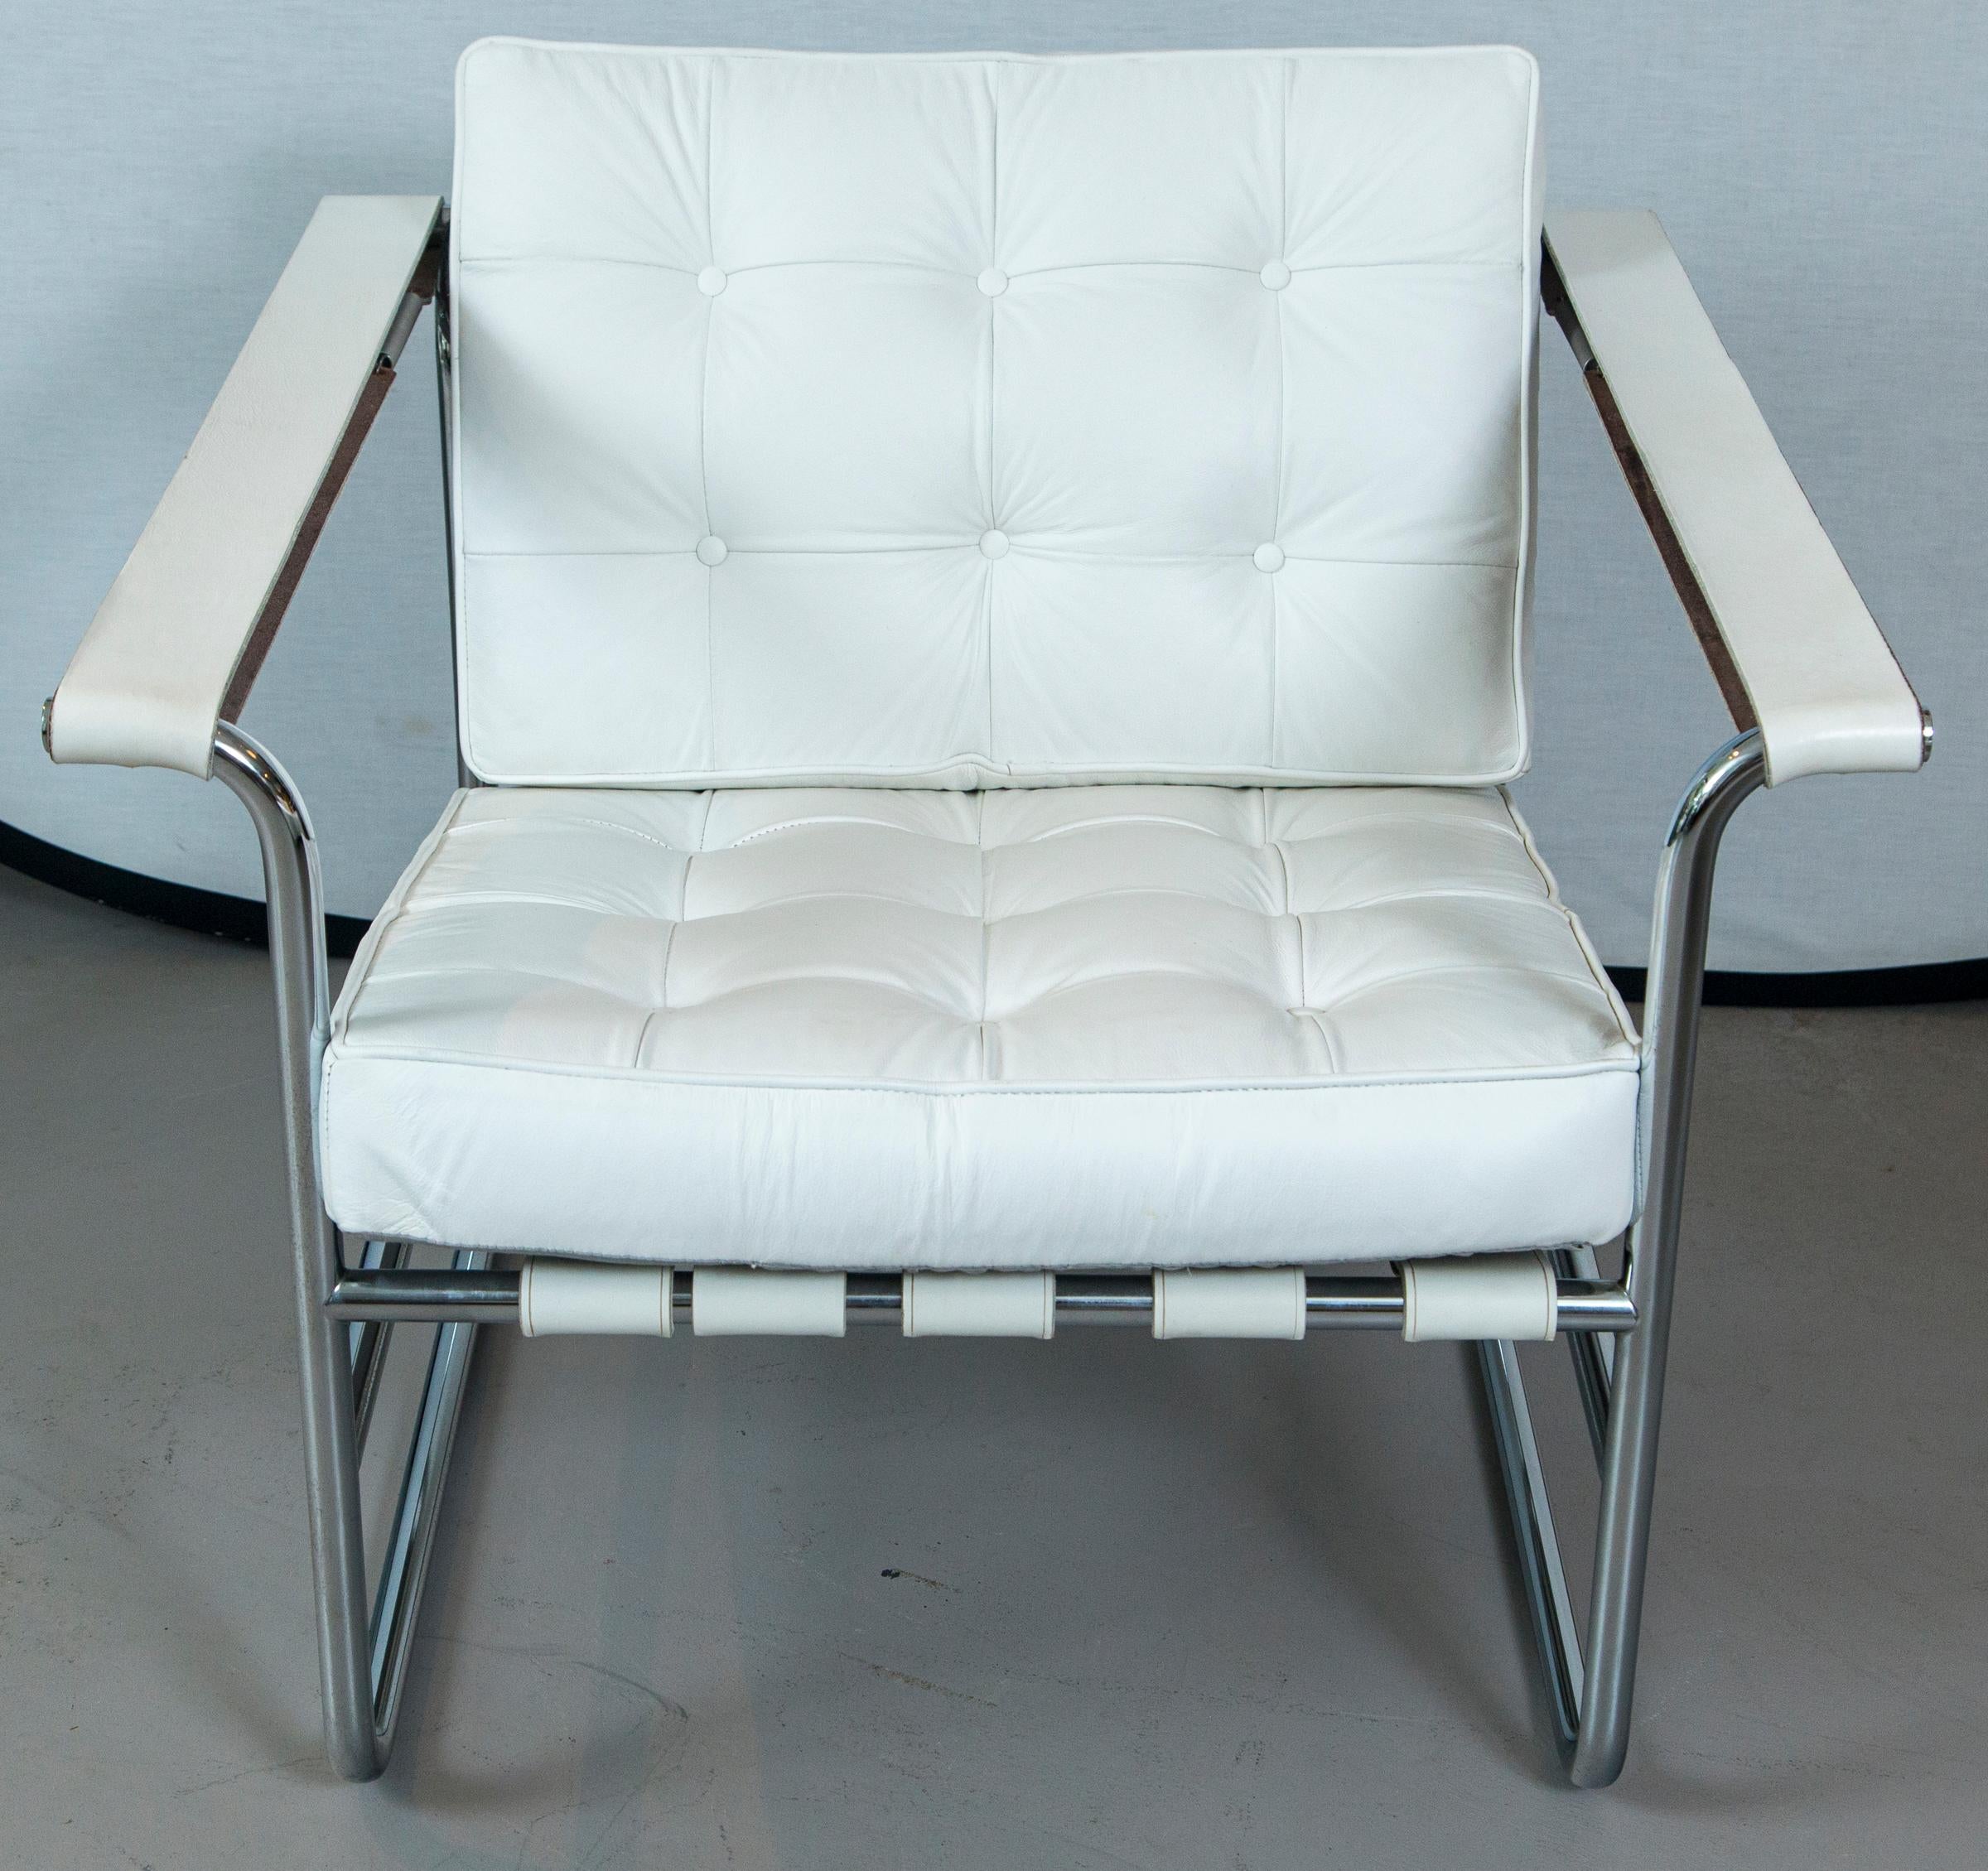 Swiss Pair of White Leather Stendig Chrome Tubular Steel Chairs